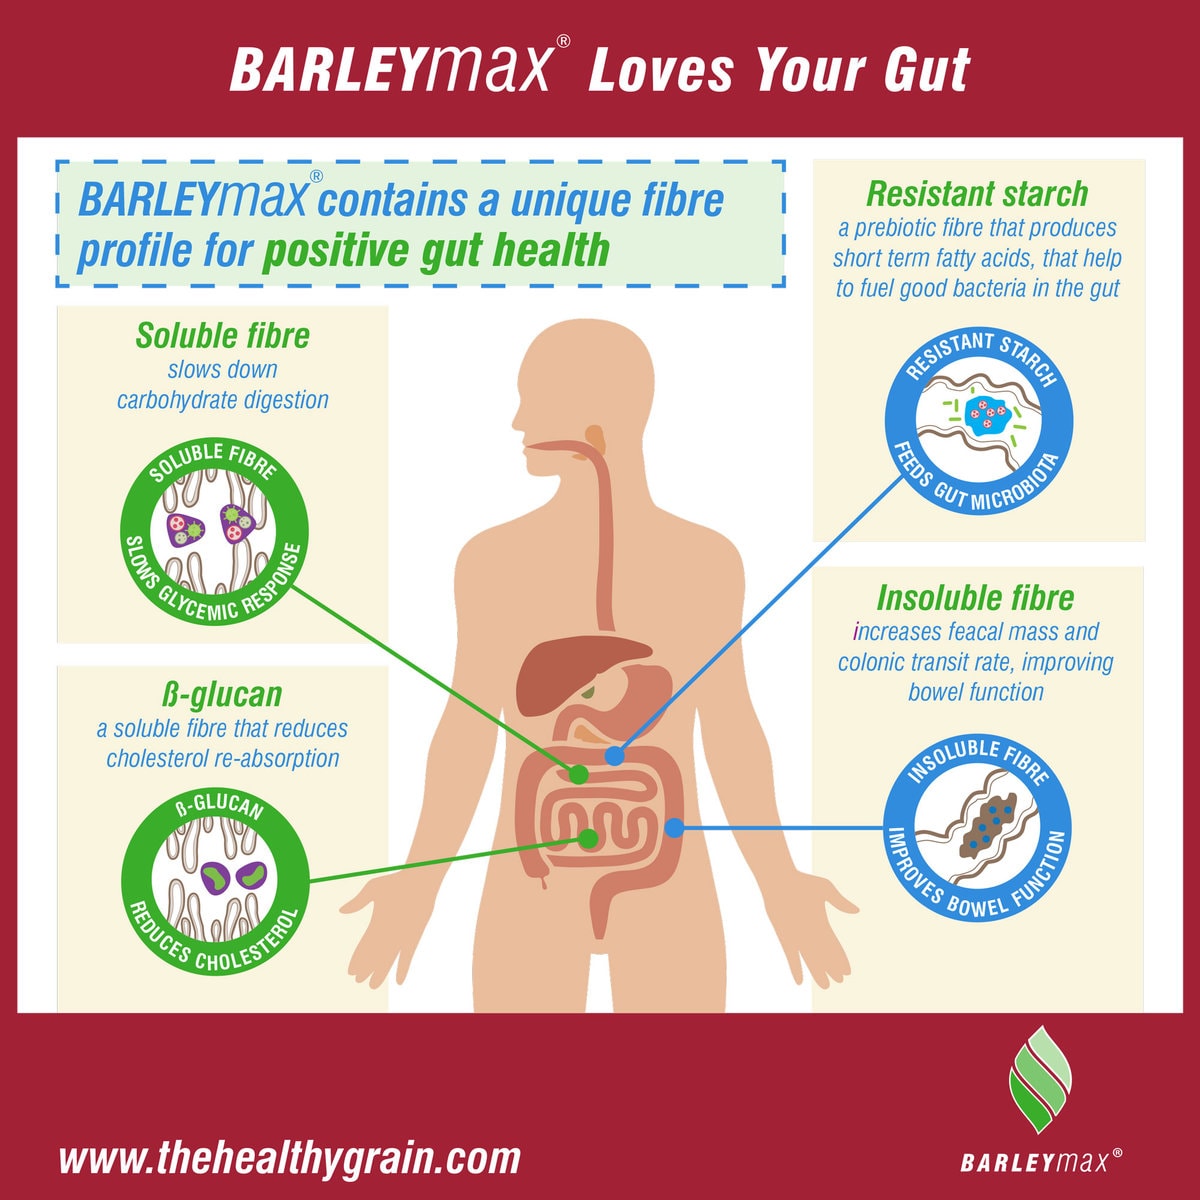 Infographic - BARLEYmax loves your gut